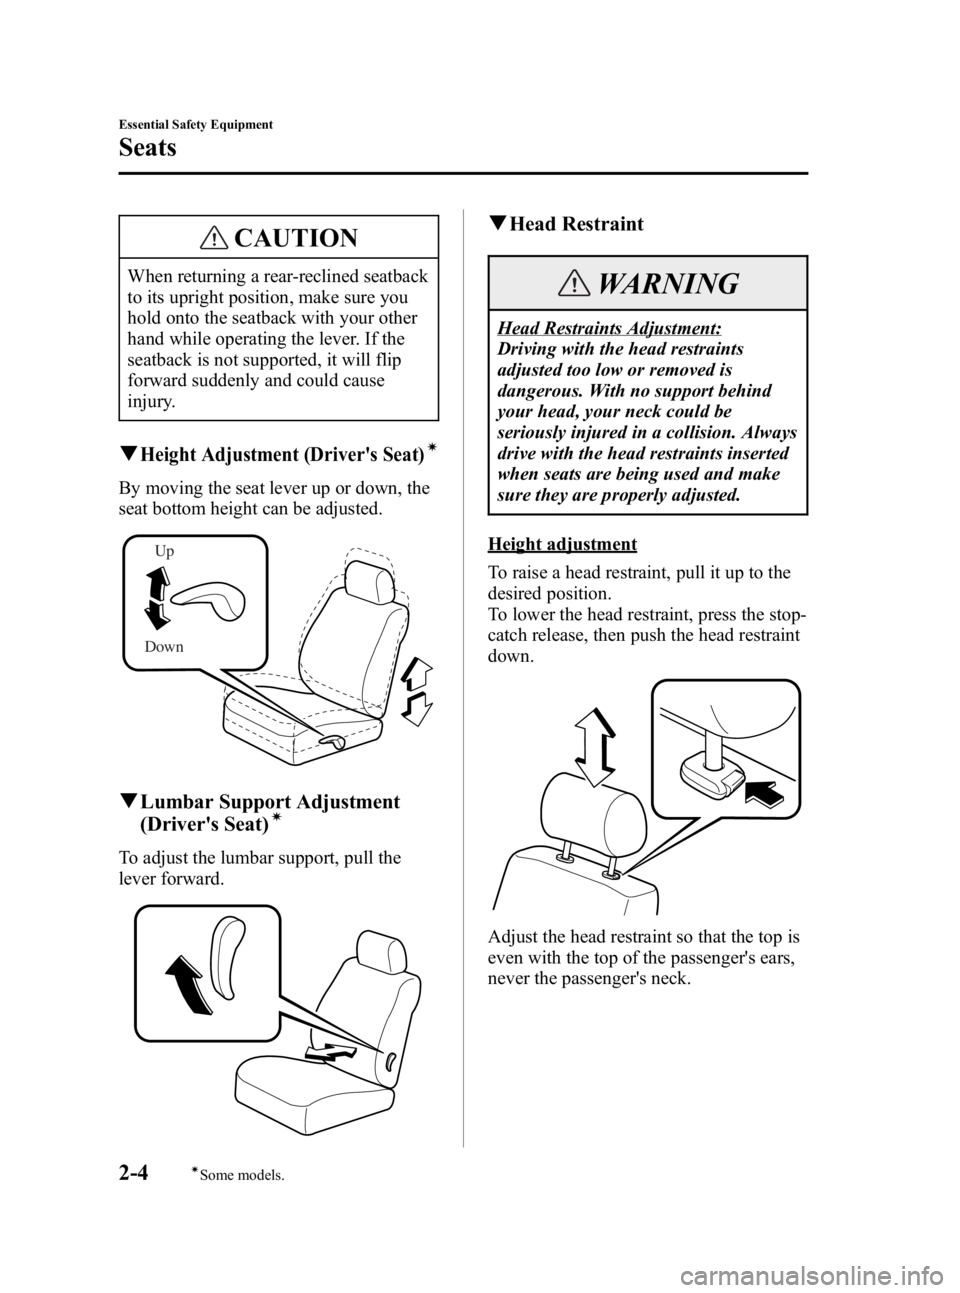 MAZDA MODEL 3 5-DOOR 2006 User Guide Black plate (18,1)
CAUTION
When returning a rear-reclined seatback
to its upright position, make sure you
hold onto the seatback with your other
hand while operating the lever. If the
seatback is not 